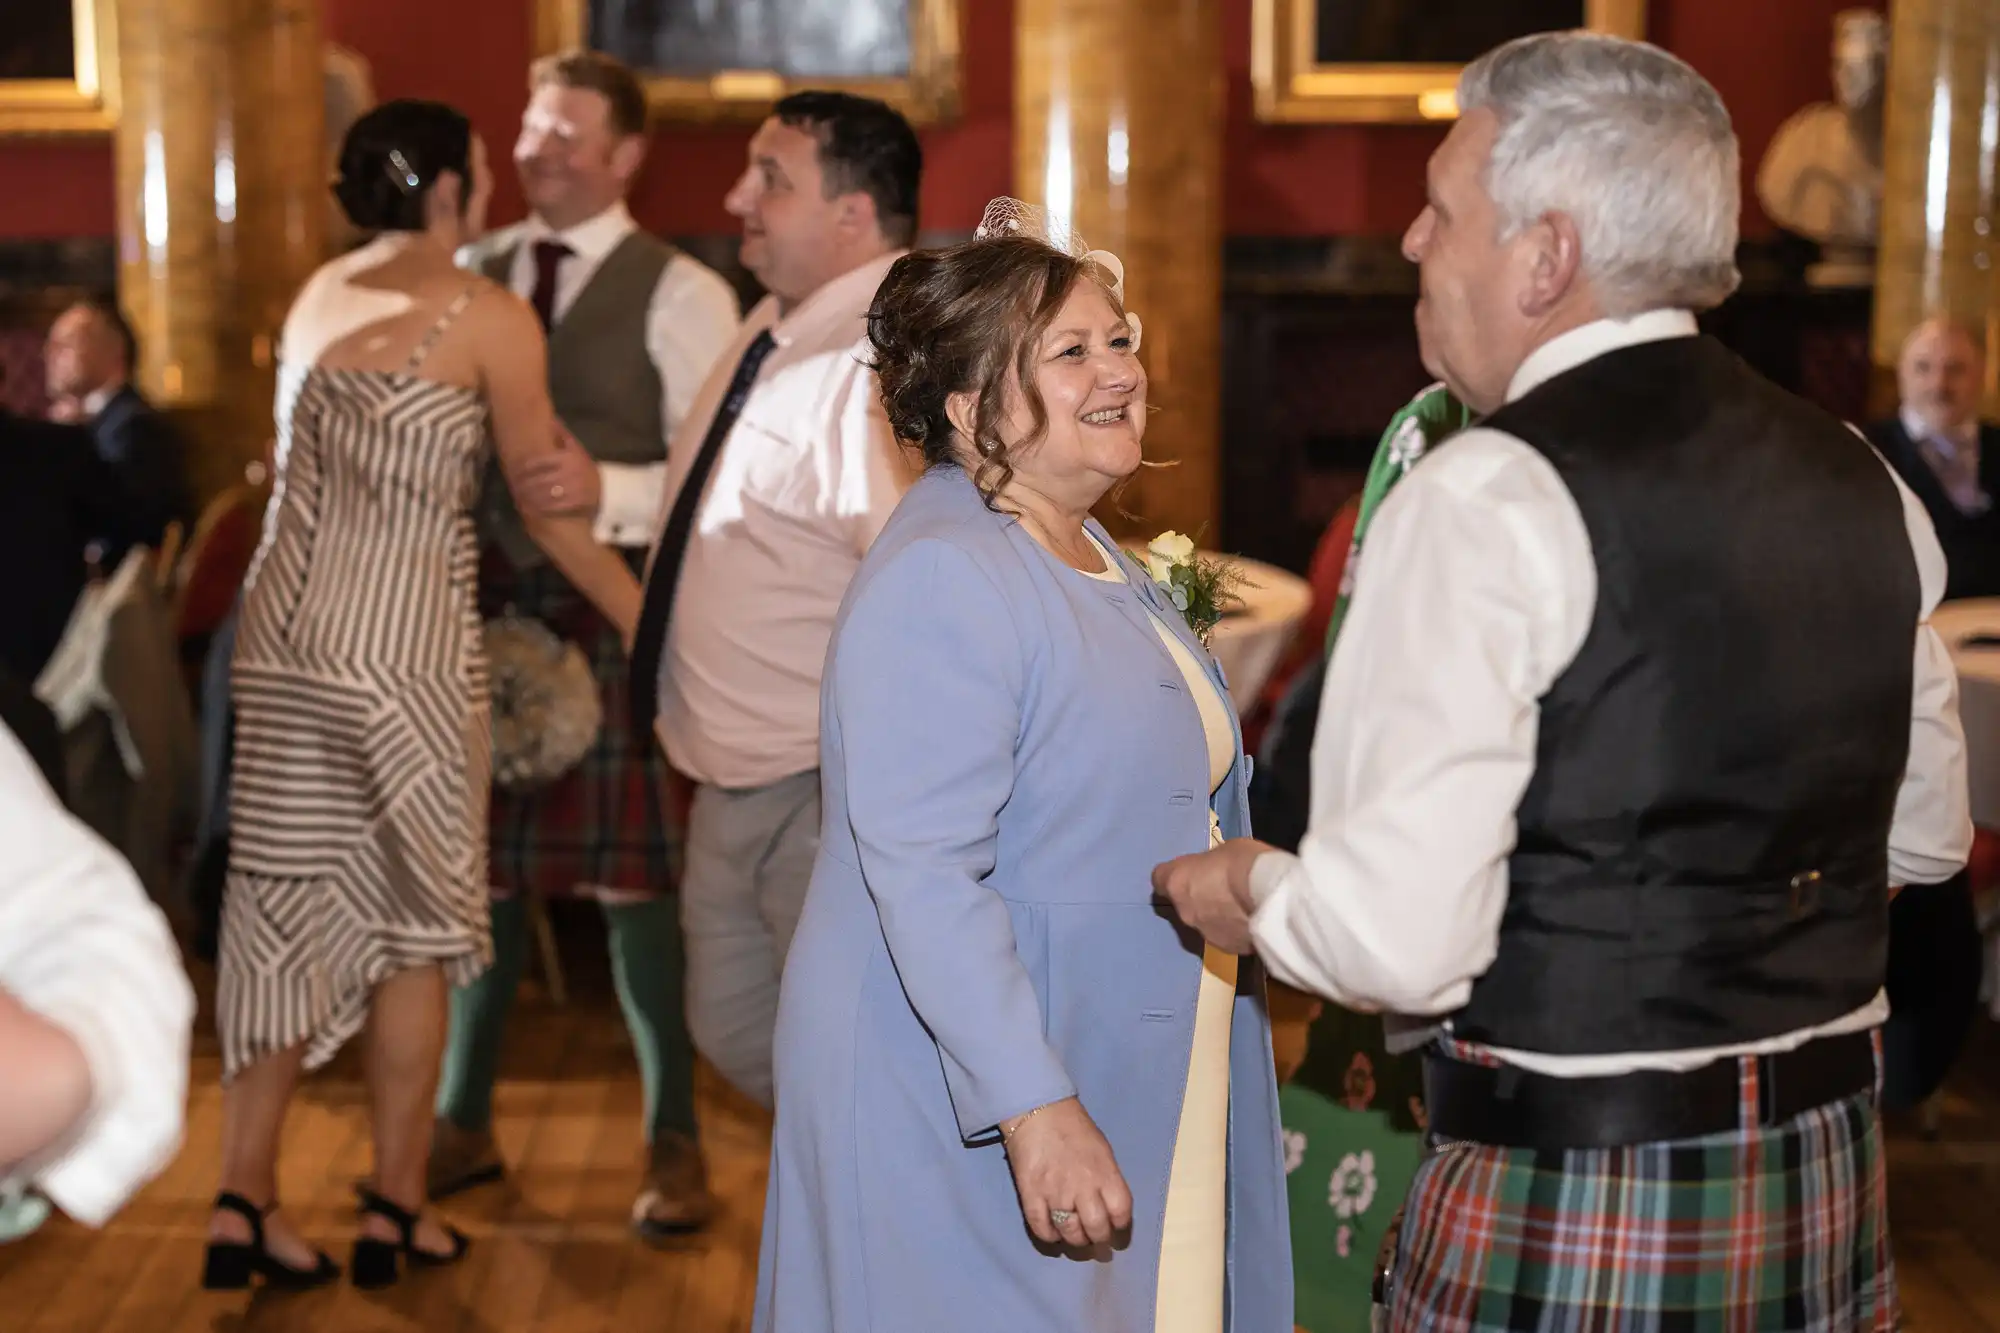 A group of people are dancing in an elegant room with red walls and columns. One woman in a blue coat and a man in a black vest and kilt are in the foreground.